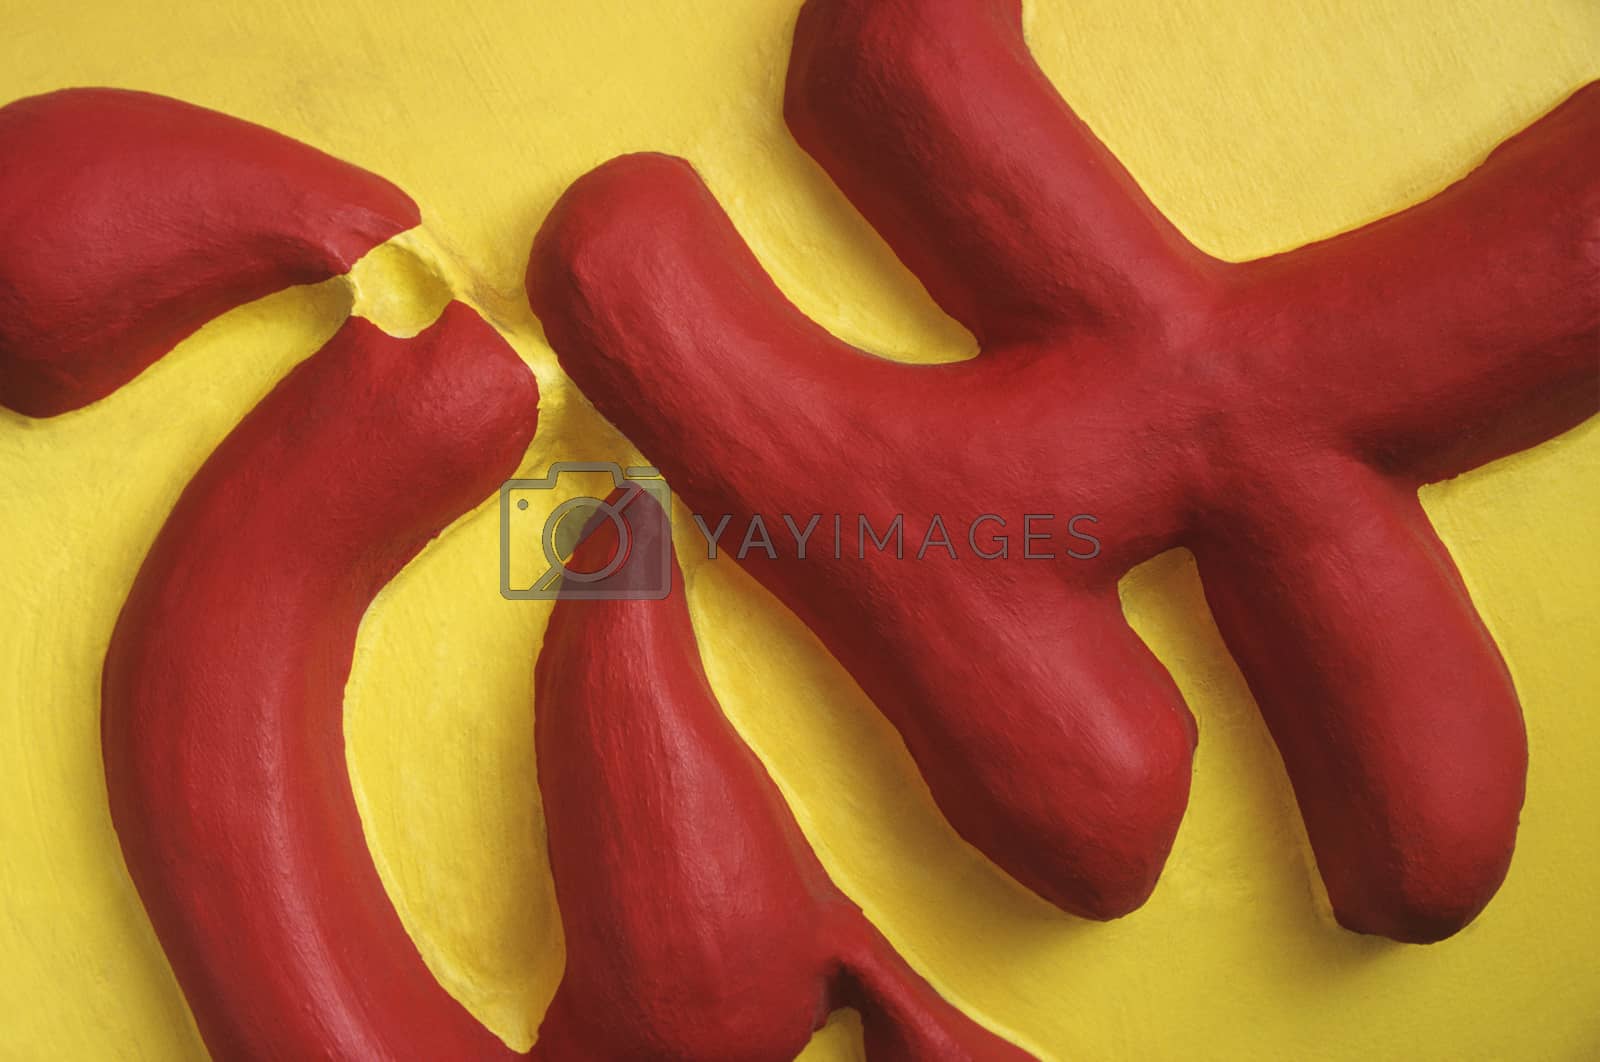 Royalty free image of Red Painted Carving by moodboard